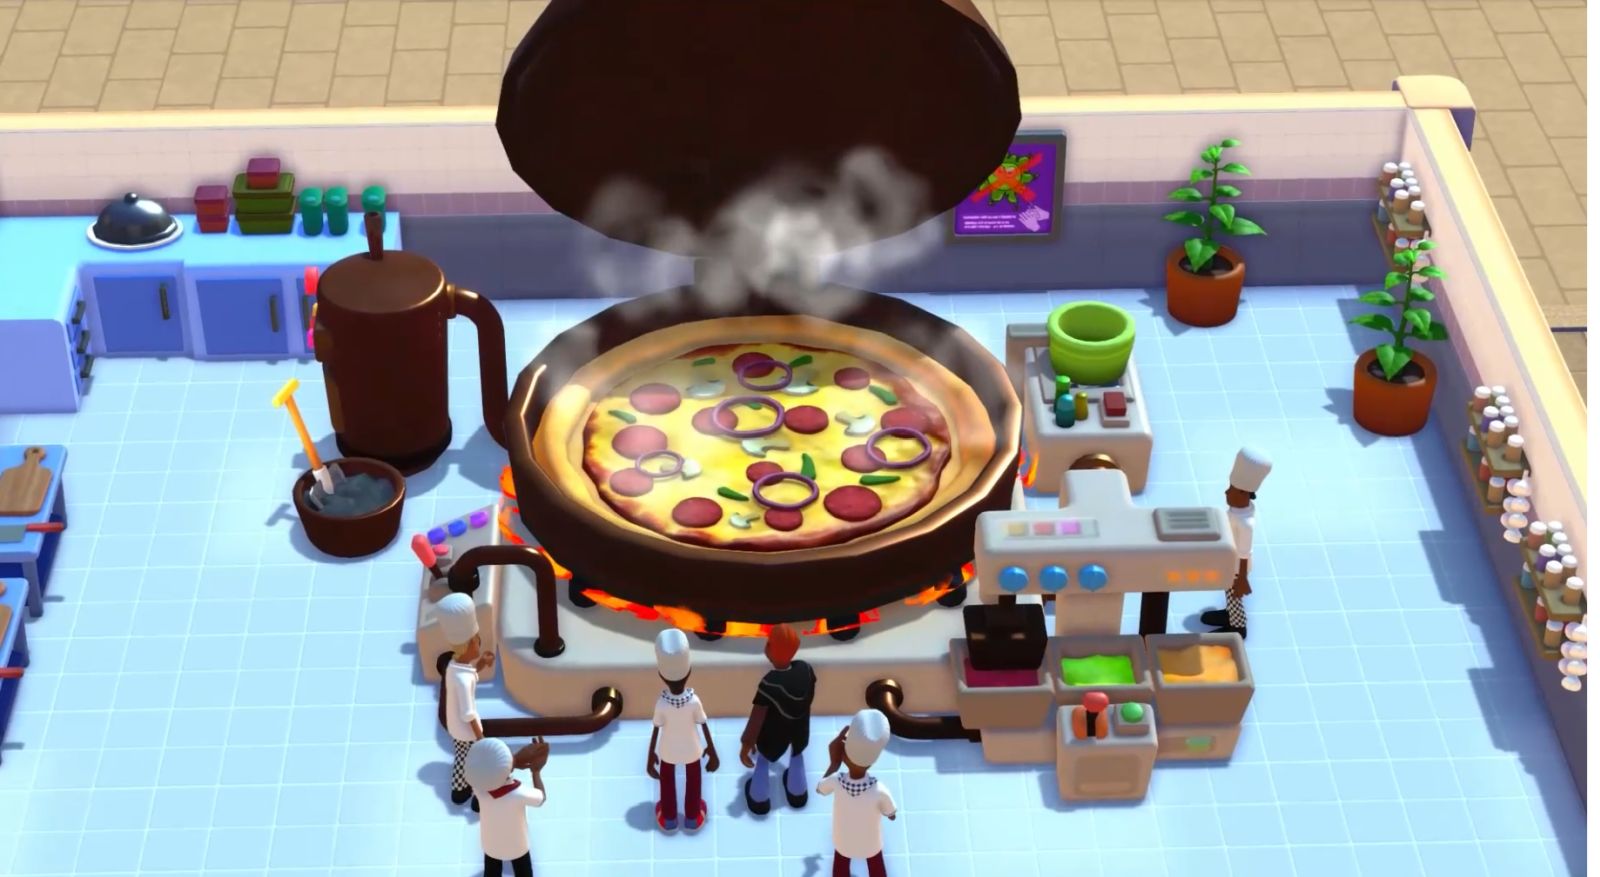 Two Point Hospital: True fact: Colleges are run on pizza. Look it up!